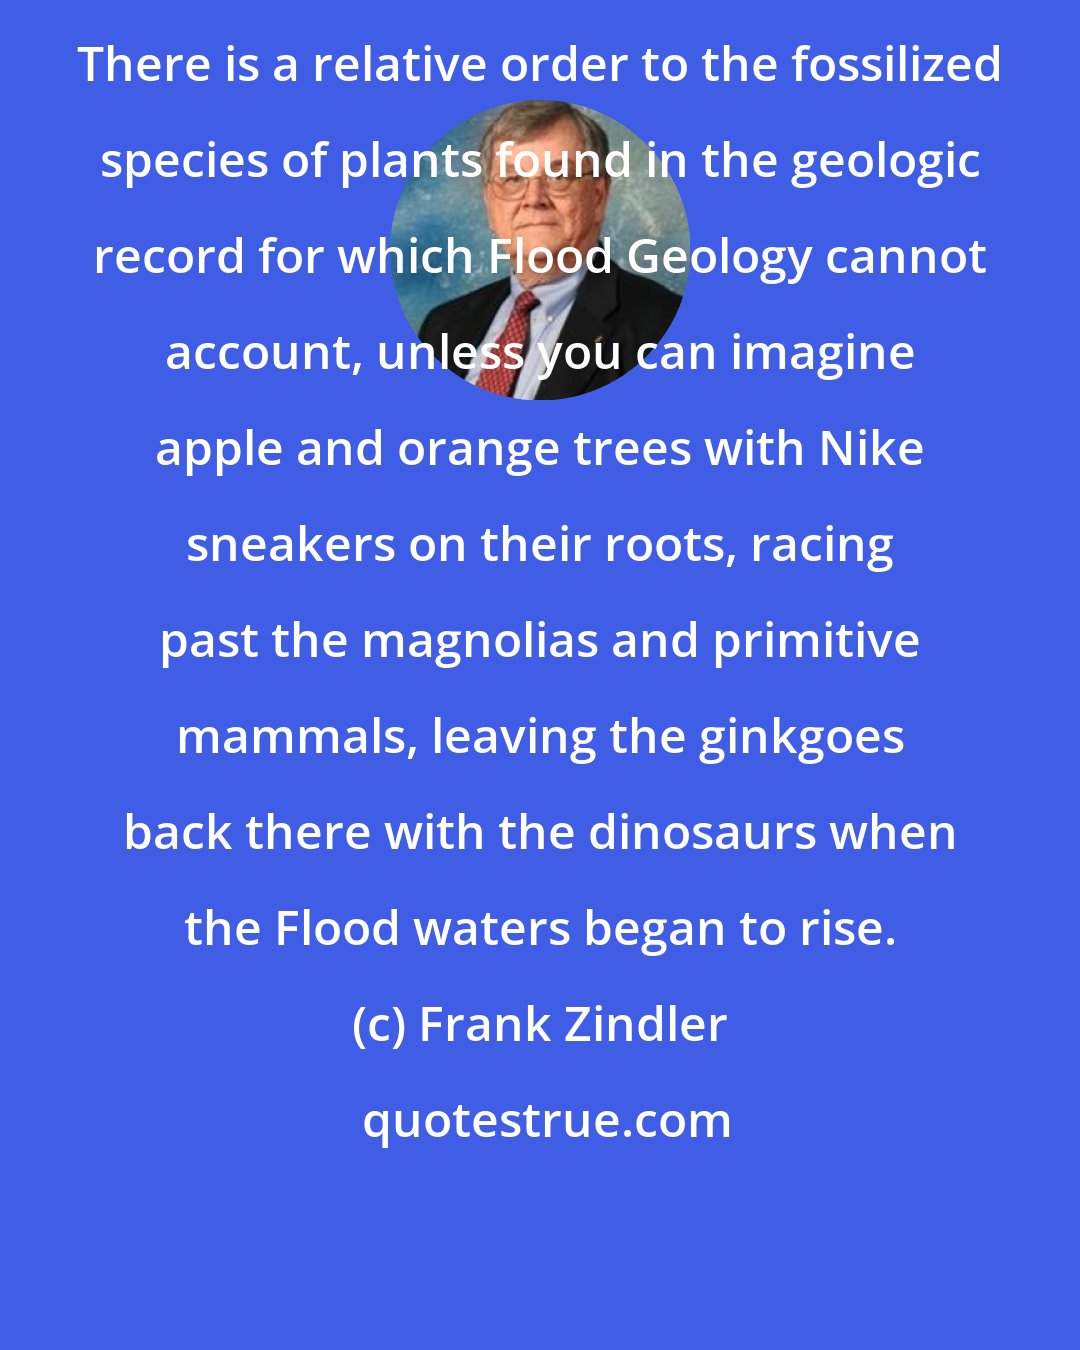 Frank Zindler: There is a relative order to the fossilized species of plants found in the geologic record for which Flood Geology cannot account, unless you can imagine apple and orange trees with Nike sneakers on their roots, racing past the magnolias and primitive mammals, leaving the ginkgoes back there with the dinosaurs when the Flood waters began to rise.